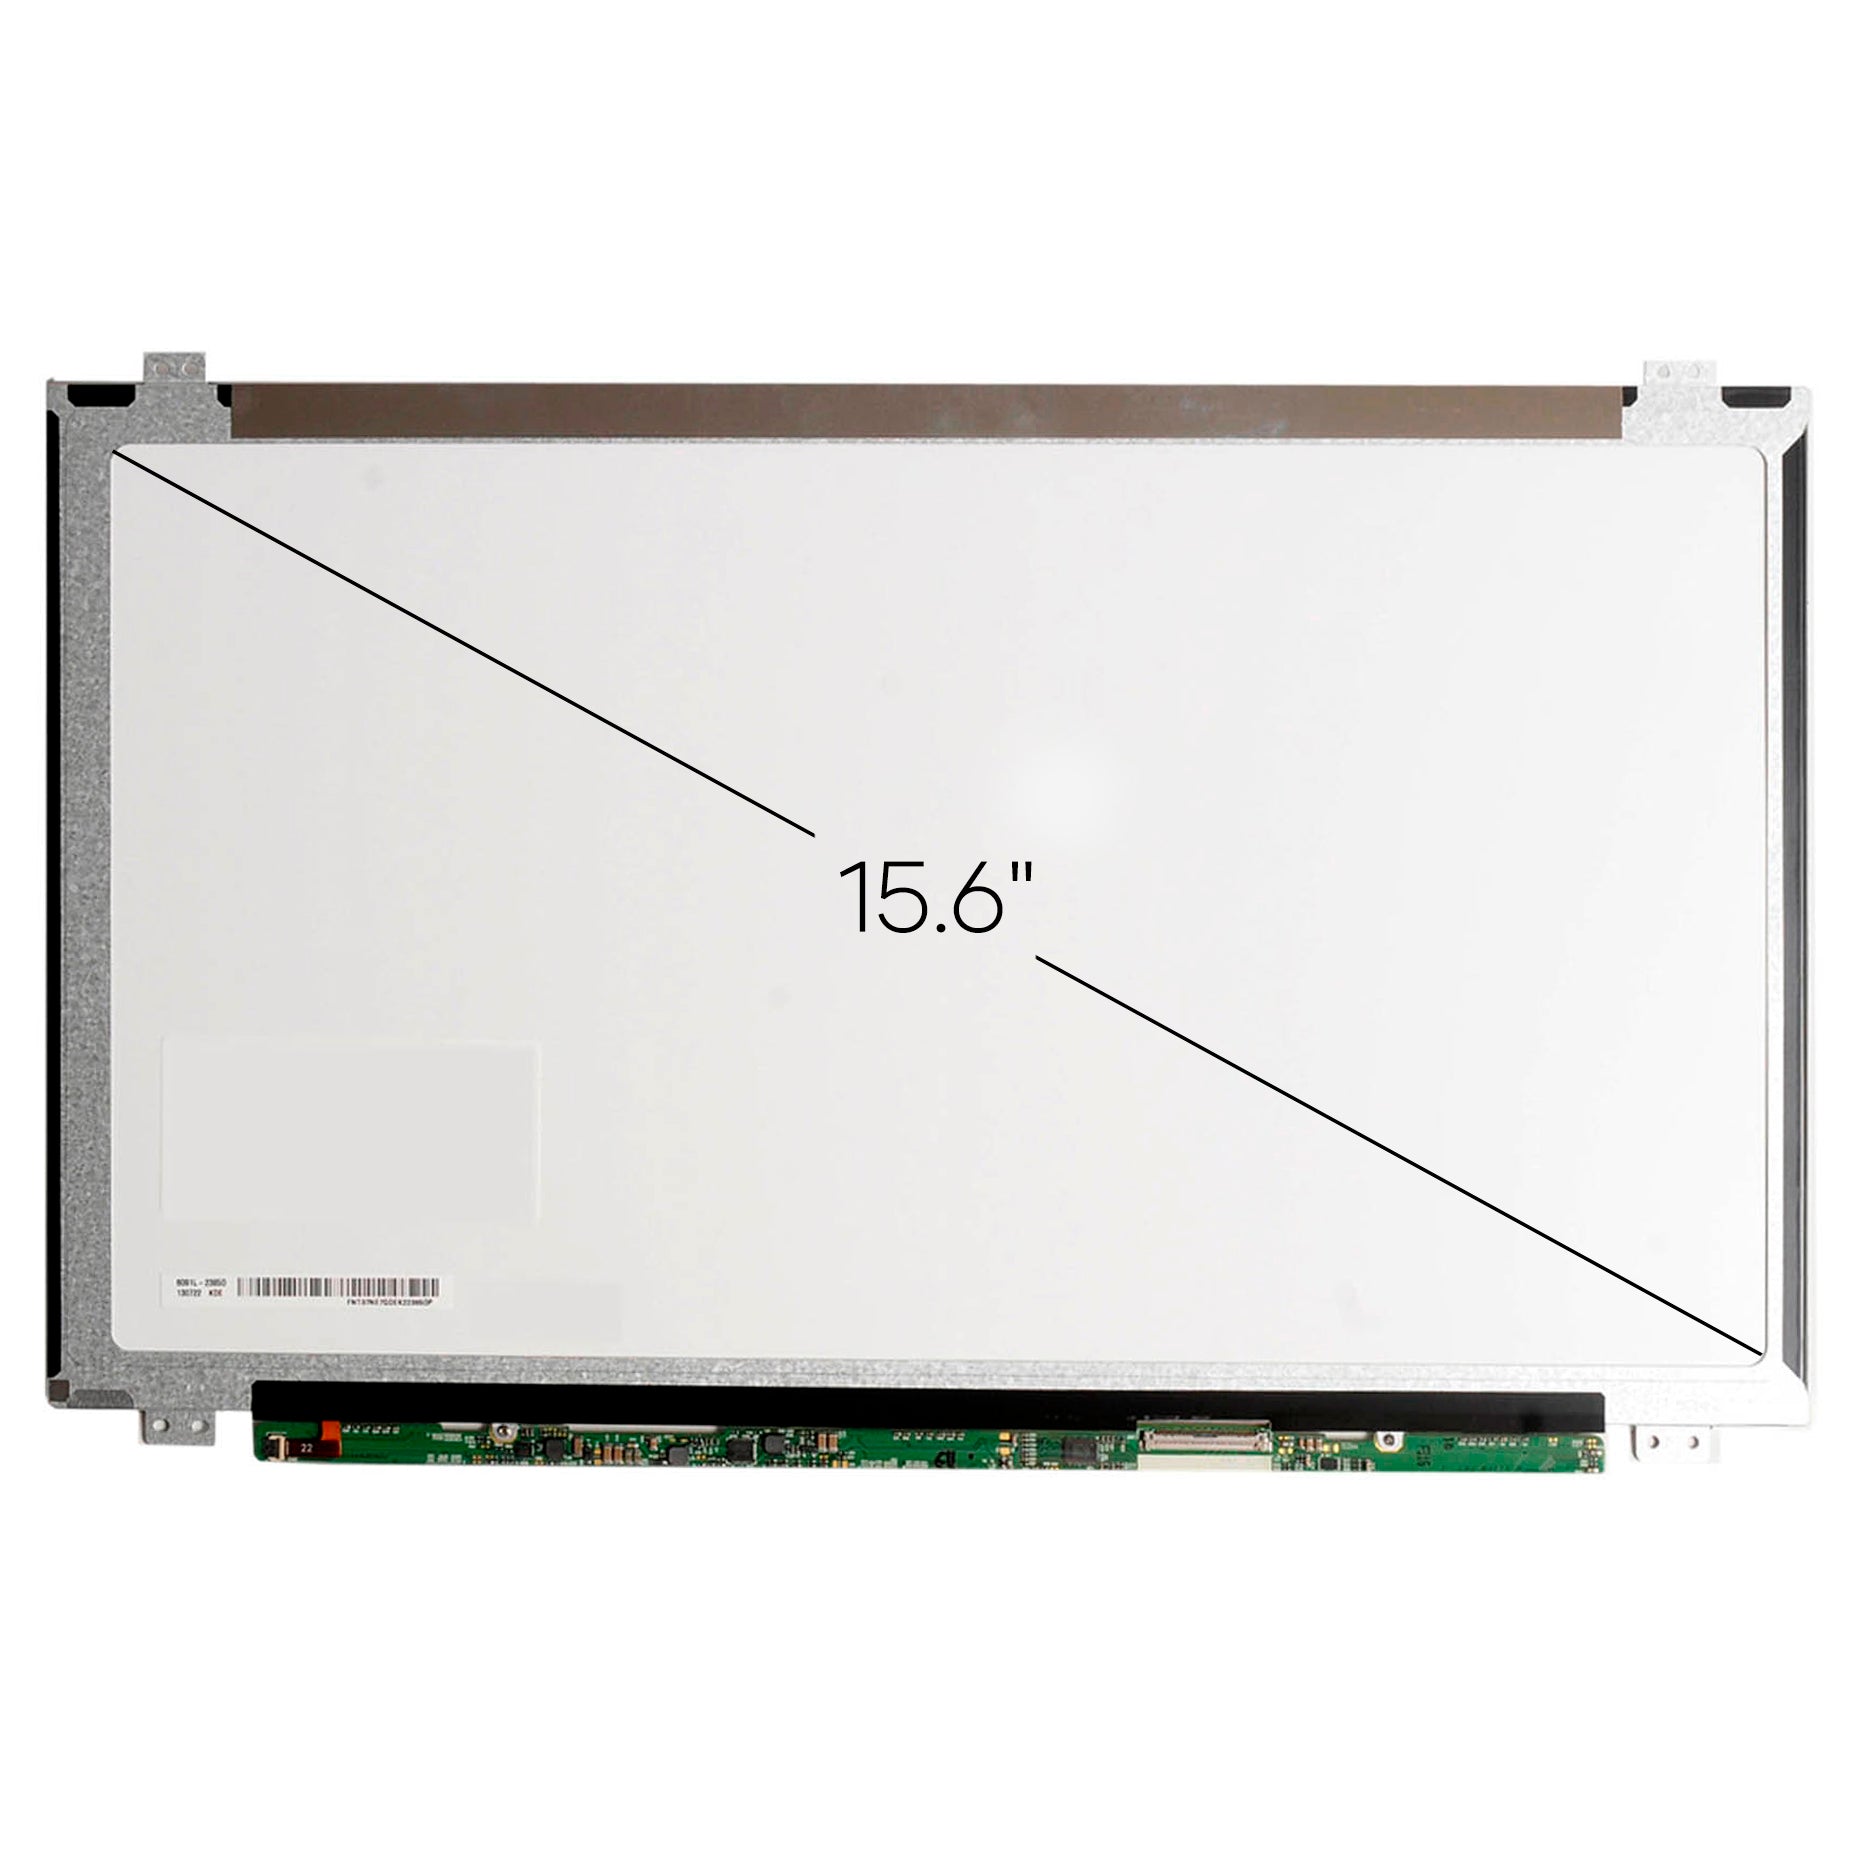 Replacement Screen For Acer Aspire V5-571-6807 HD 1366x768 Glossy LCD LED Display